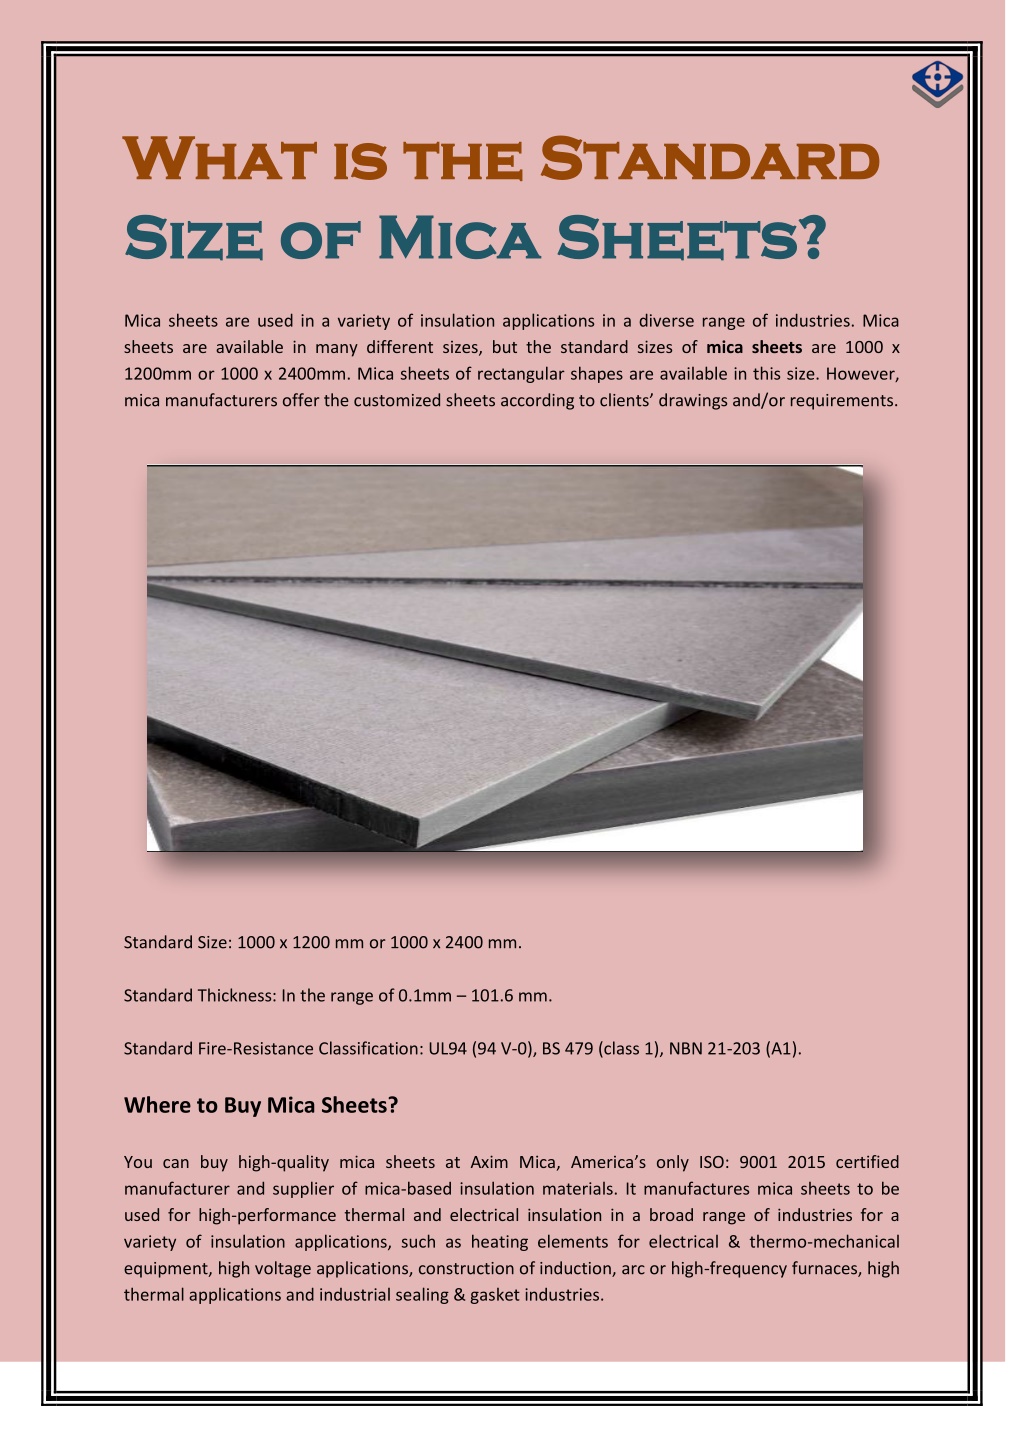 PPT - What is the Standard Size of Mica Sheets? PowerPoint Presentation -  ID:10615510